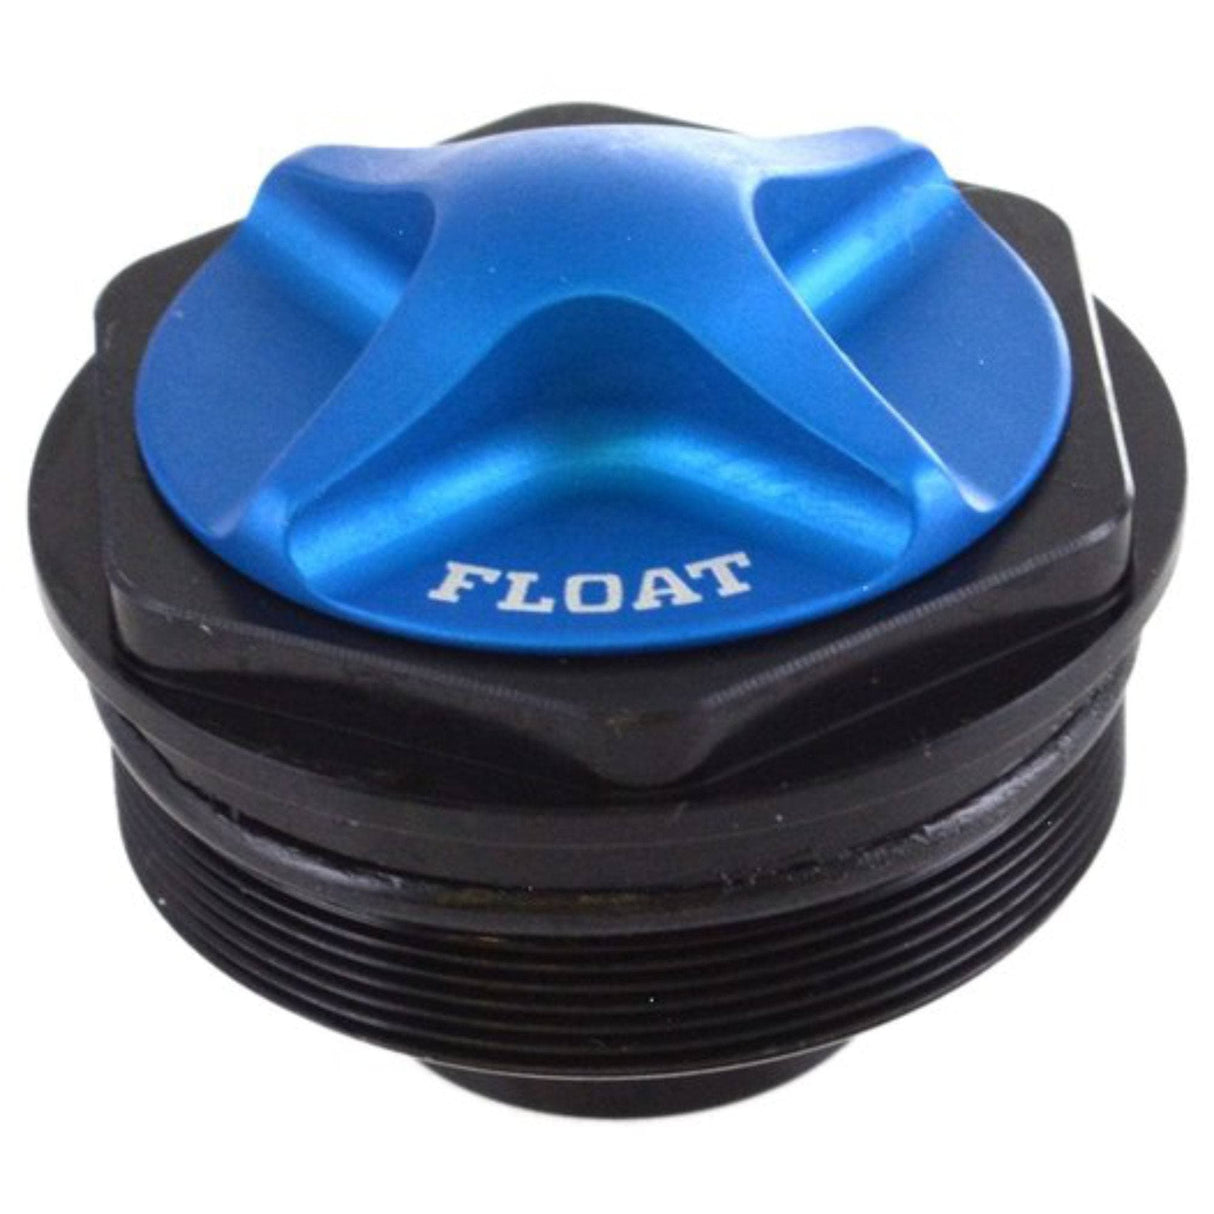 Fox Fork 36 Float LC NA2 831 Topcap Assembly Service Kit 2018